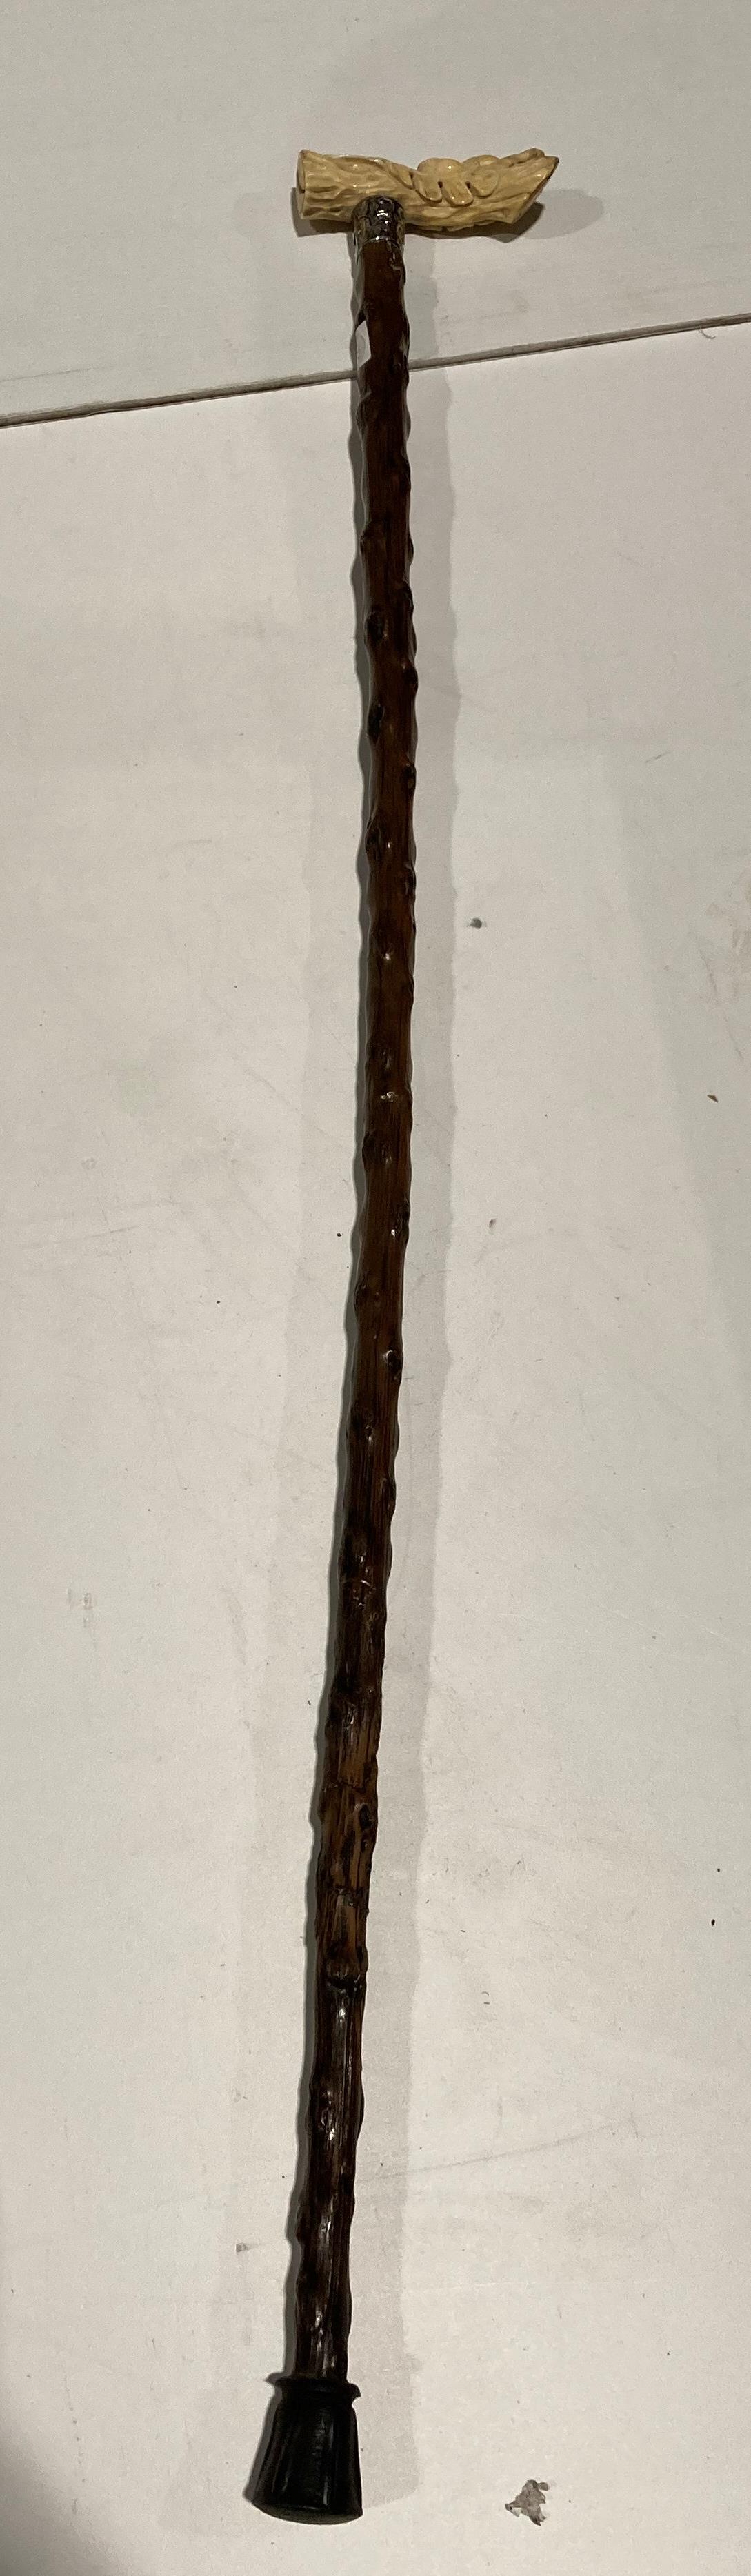 Brown wooden hand made walking stick with silver collar and a resin hand-carved acorn and leaf